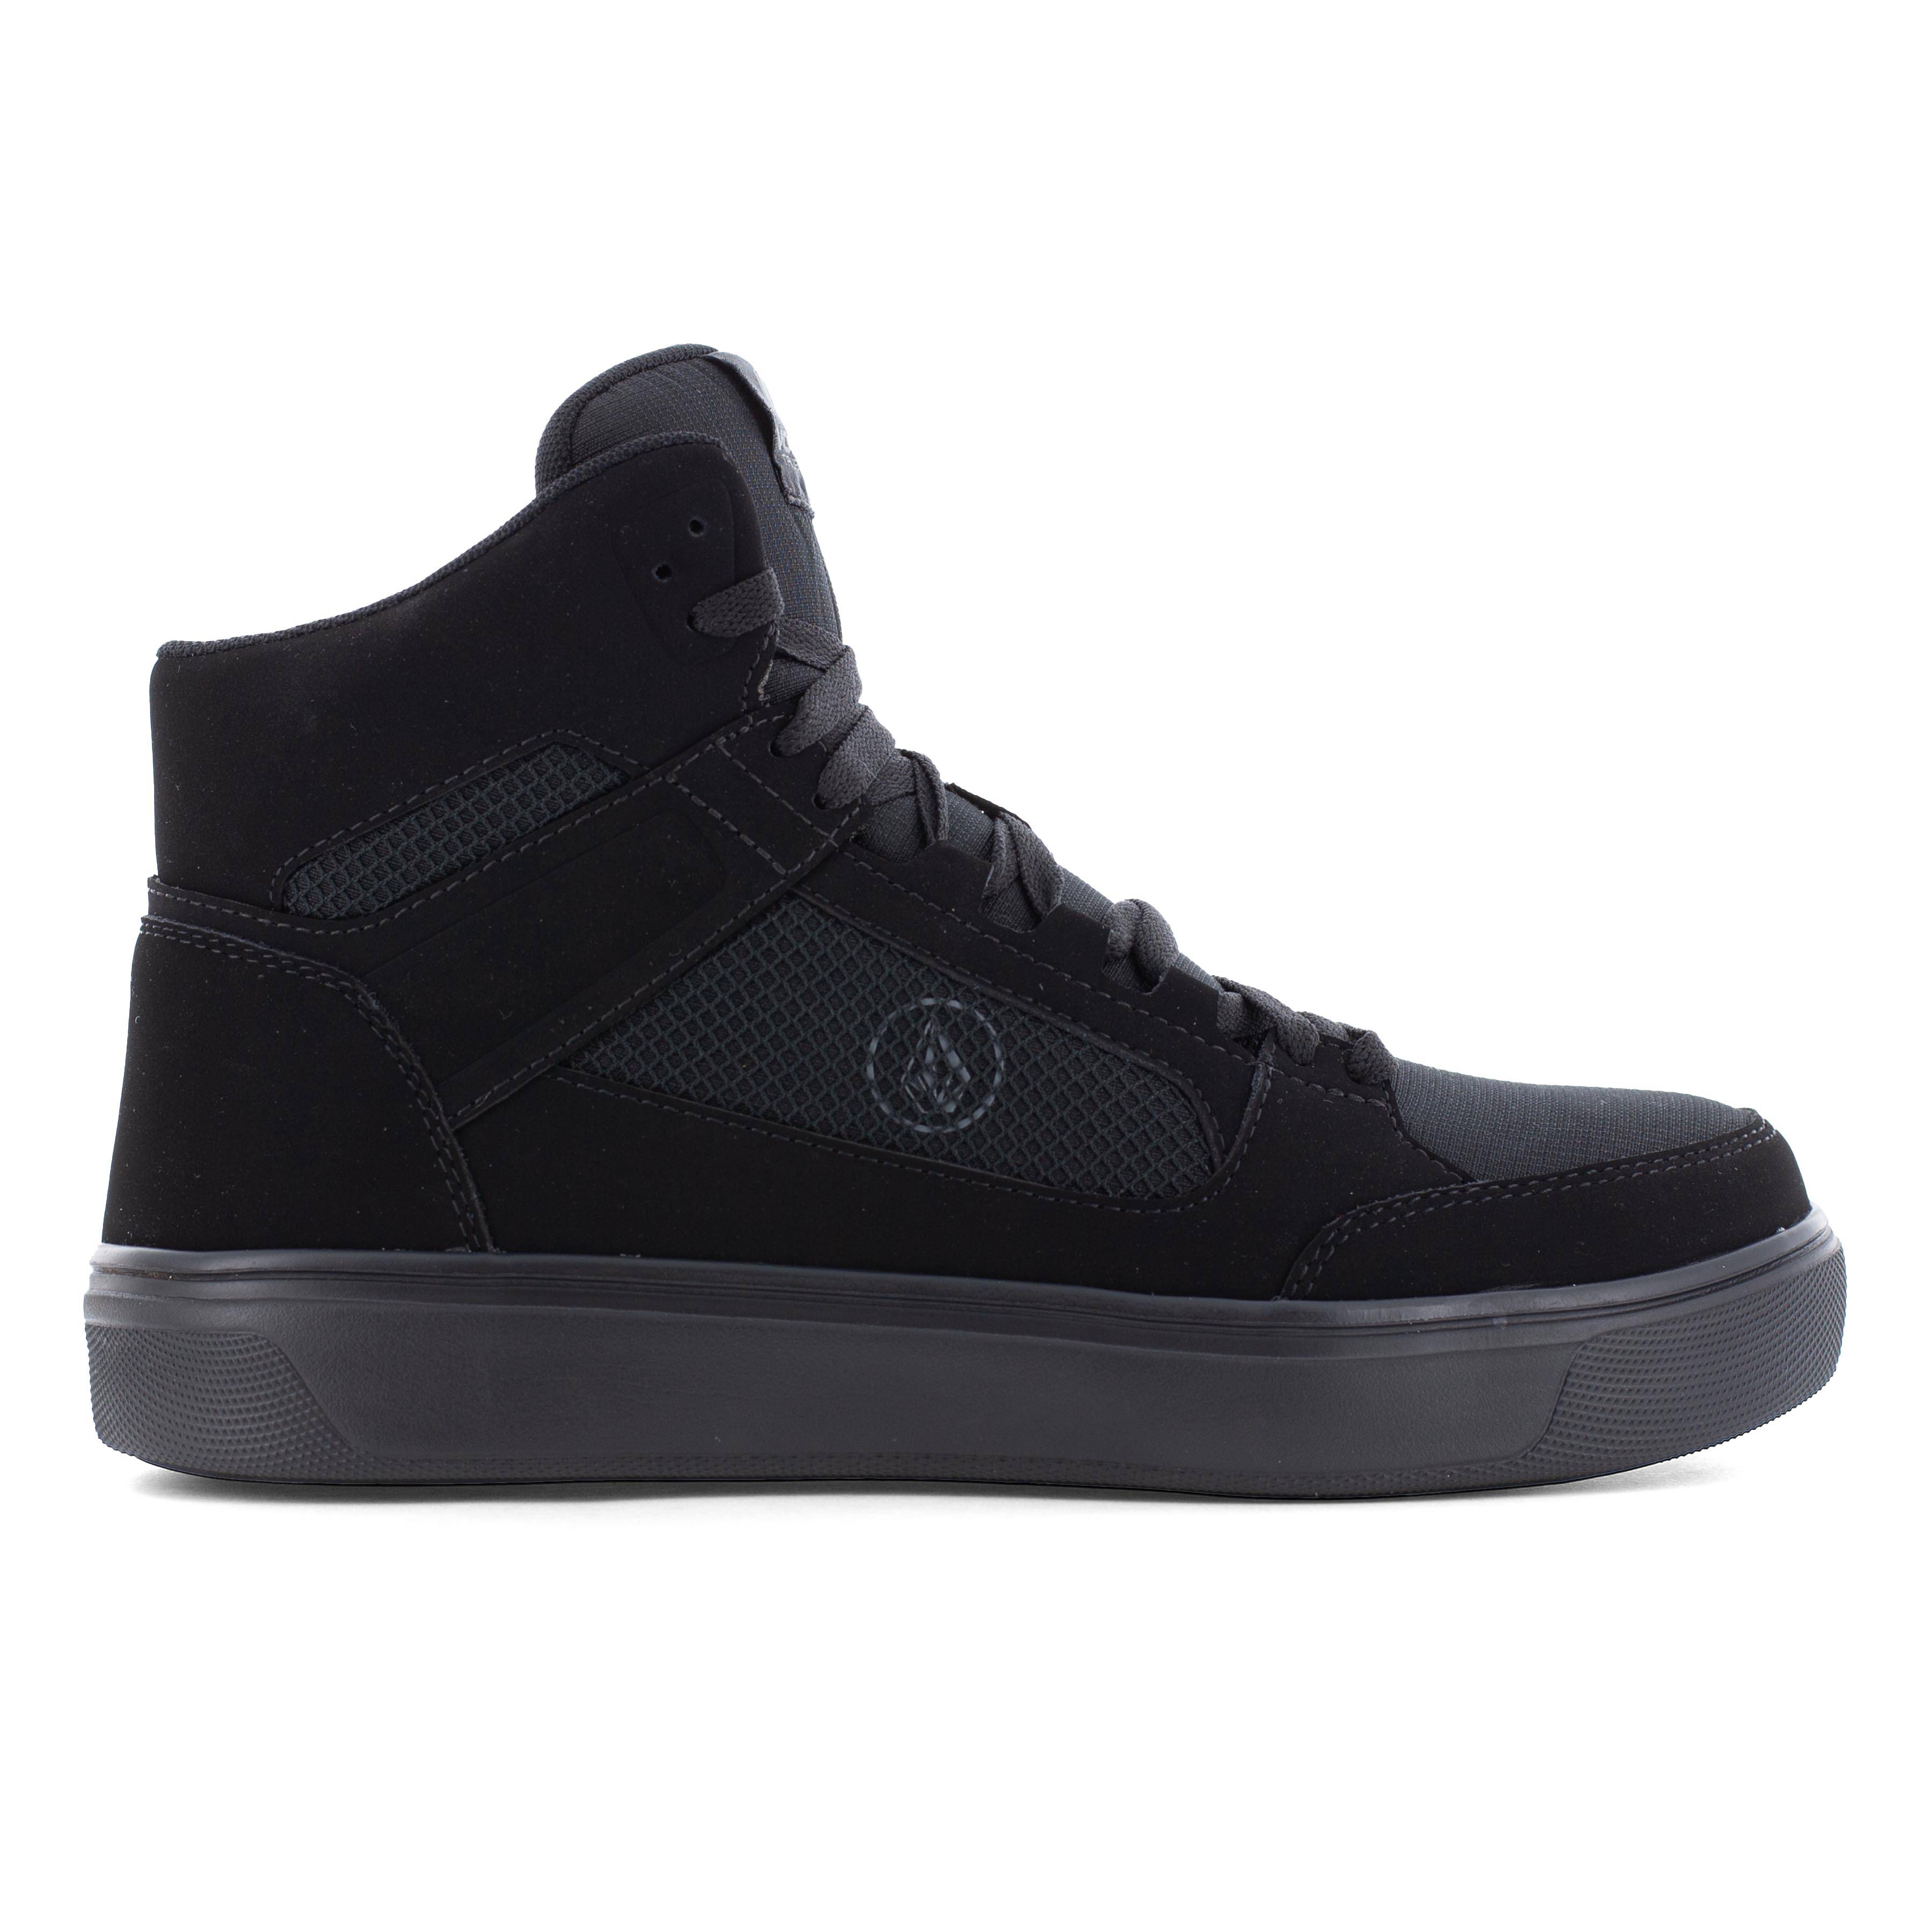 Volcom Workwear Women's Evolve Composite Toe High Top Shoes